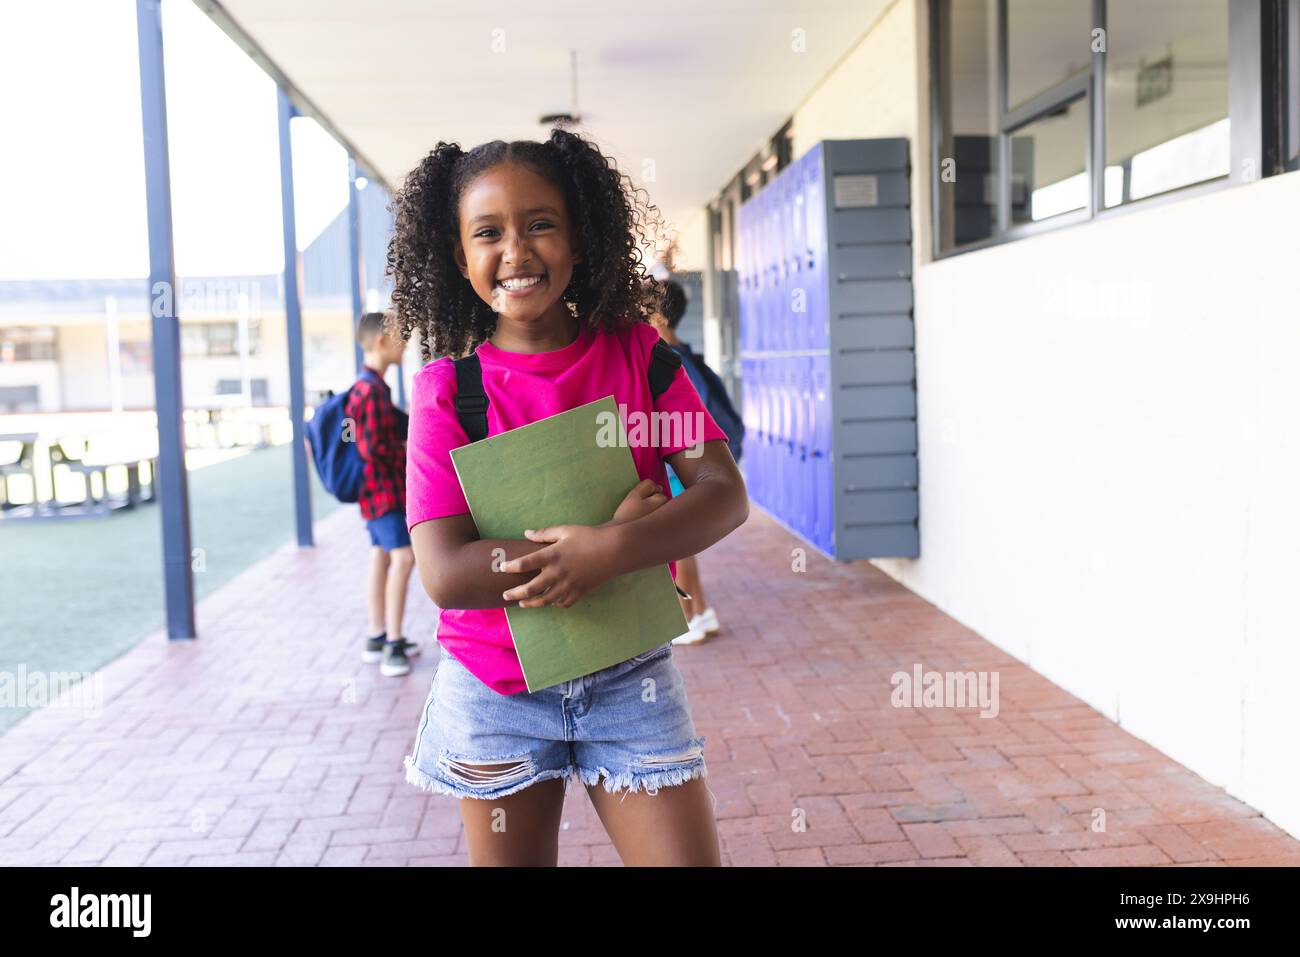 Biracial girl with curly hair smiles, holding a green book at school Stock Photo